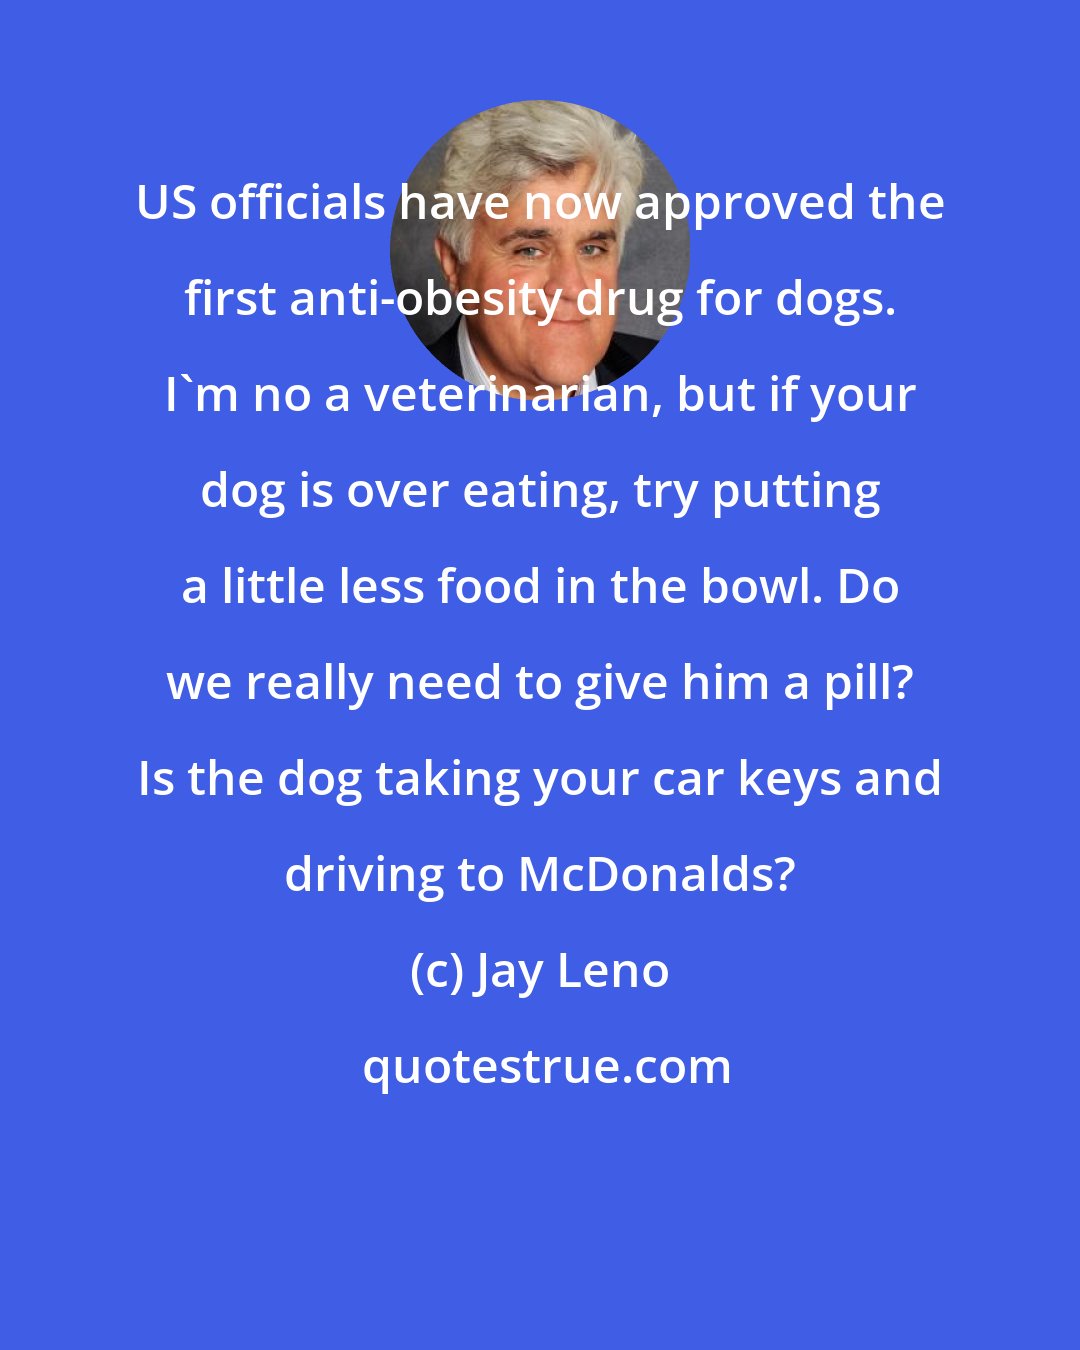 Jay Leno: US officials have now approved the first anti-obesity drug for dogs. I'm no a veterinarian, but if your dog is over eating, try putting a little less food in the bowl. Do we really need to give him a pill? Is the dog taking your car keys and driving to McDonalds?